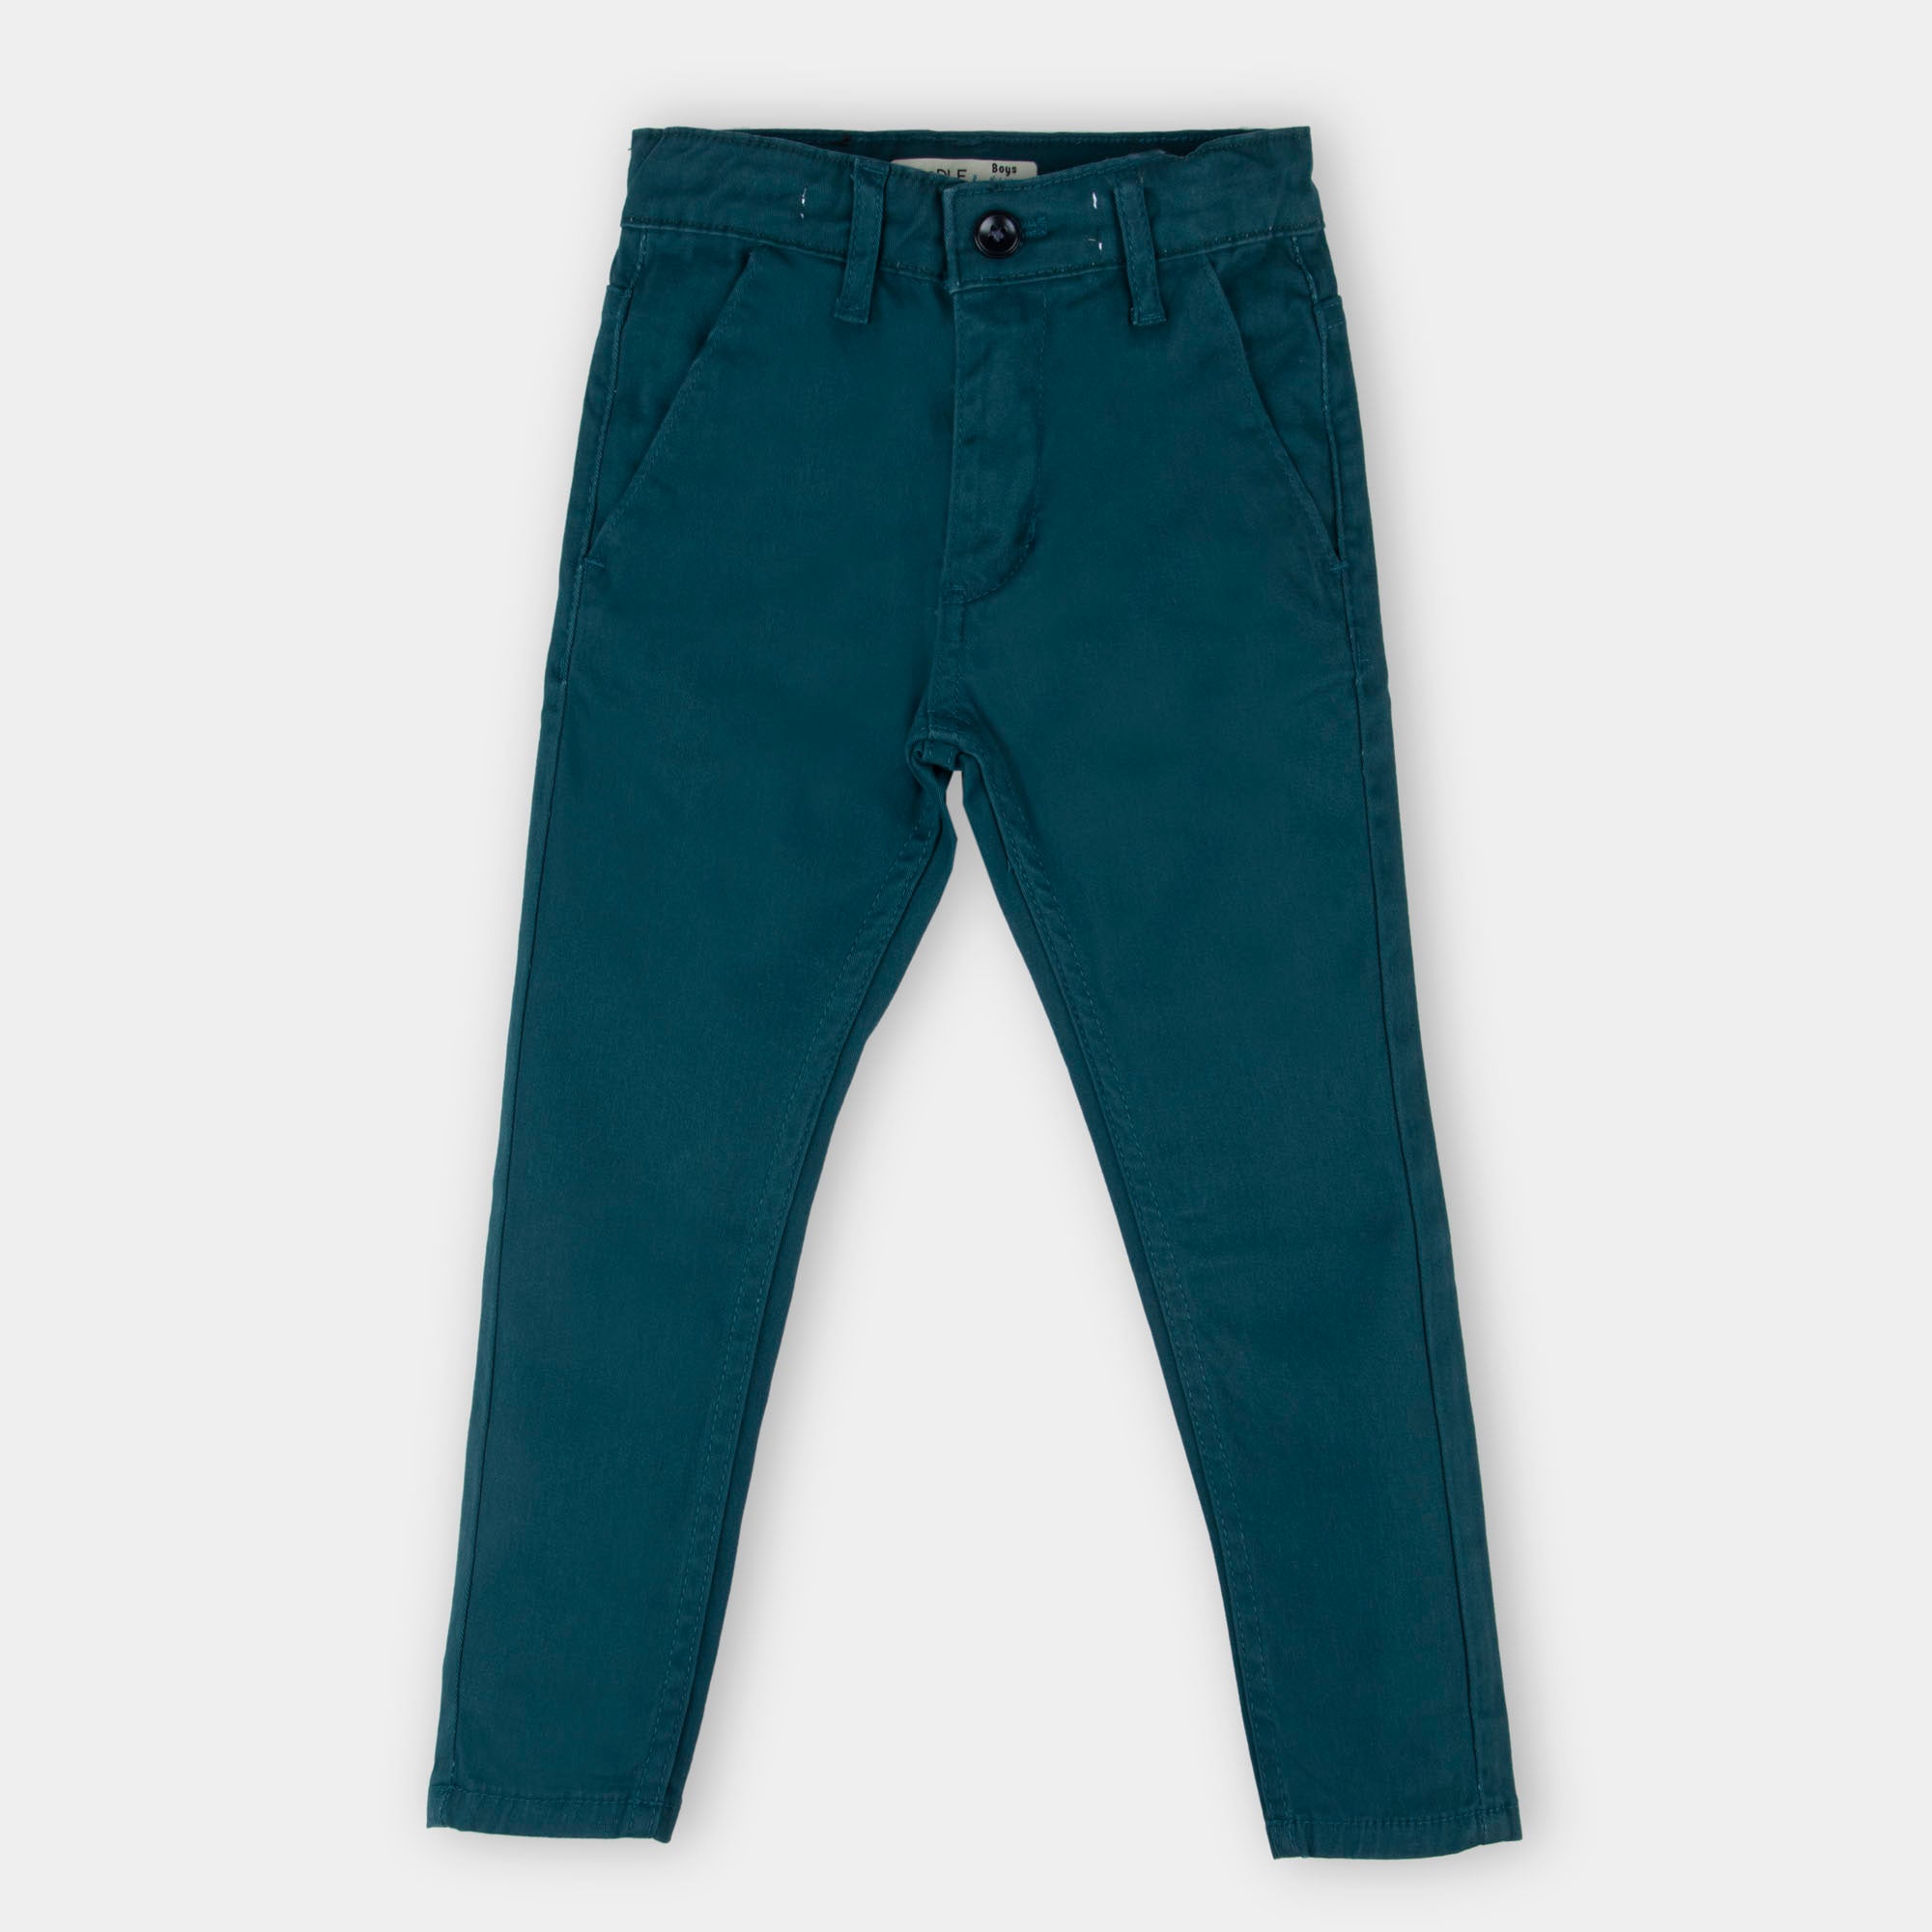 Boys Teal Blue Chino Patch